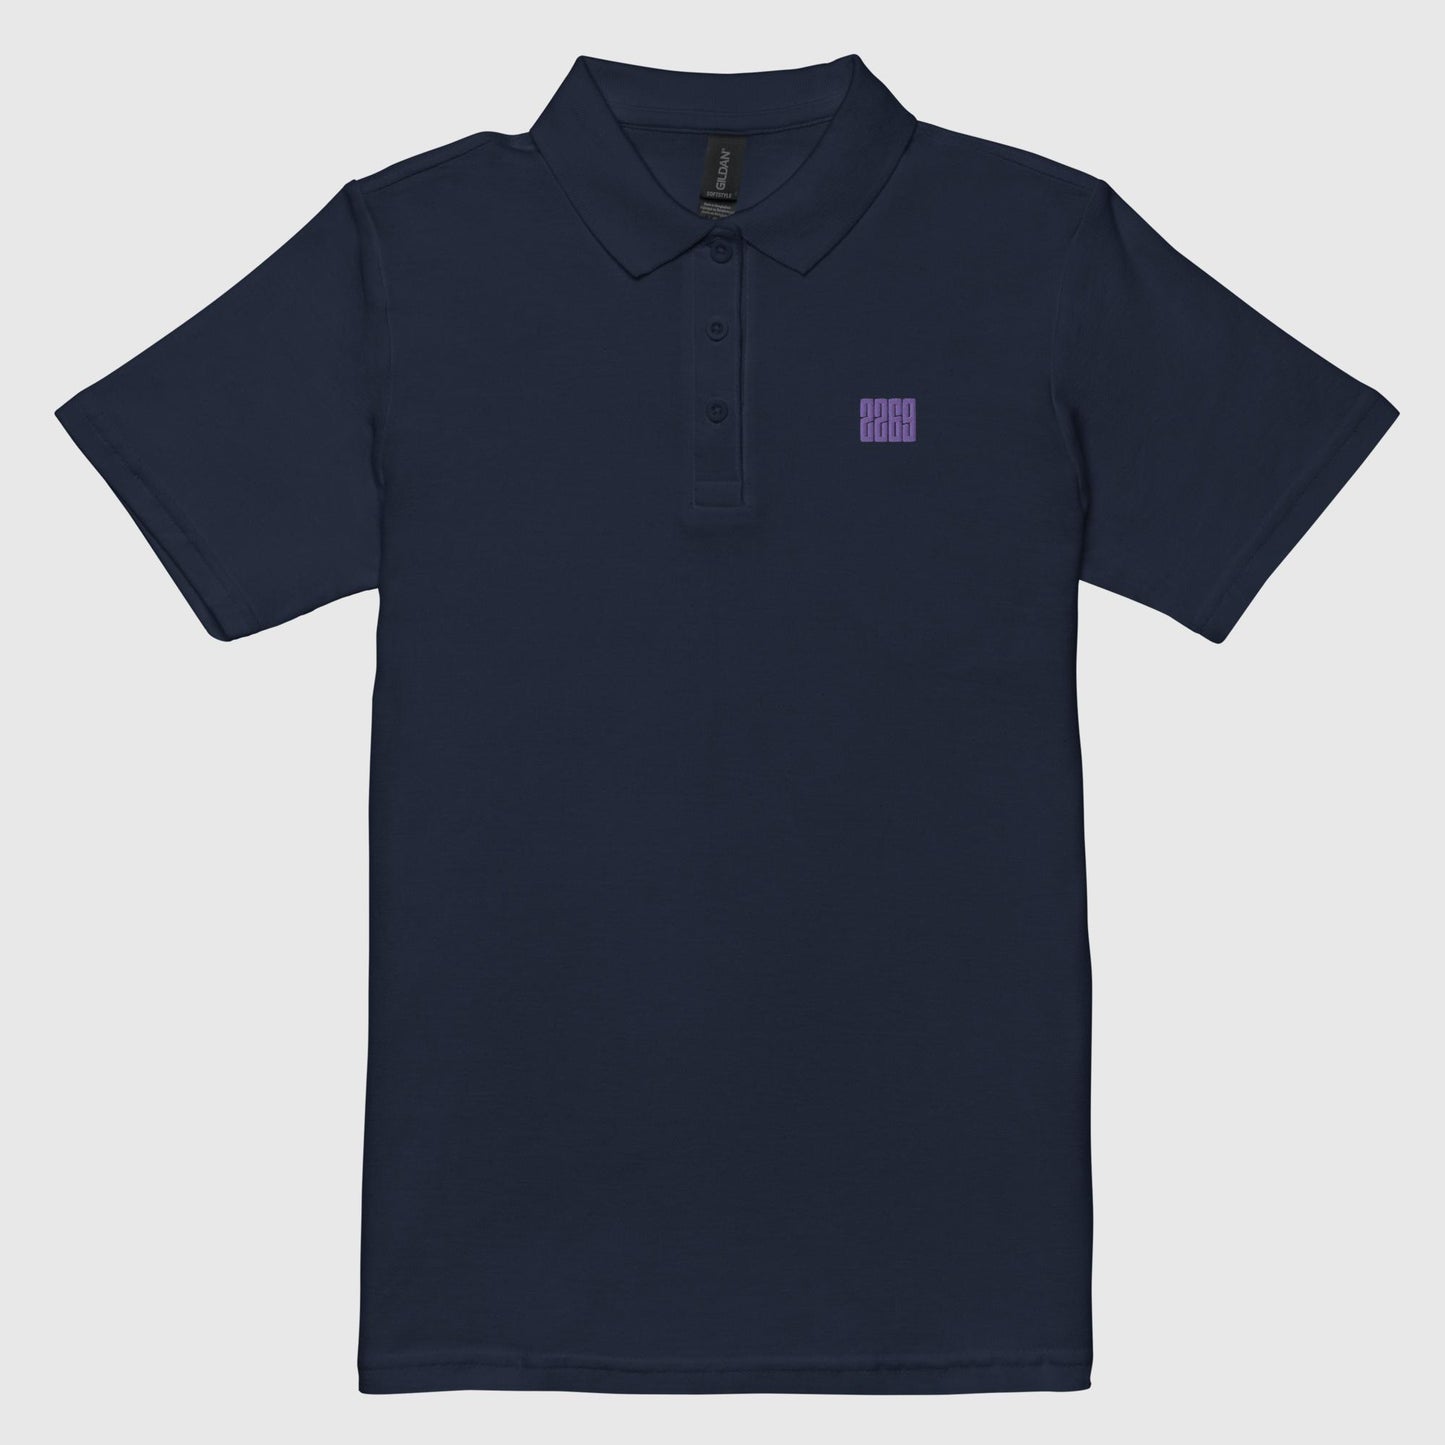 Women’s navy pique polo shirt with embroidered 2269 logo